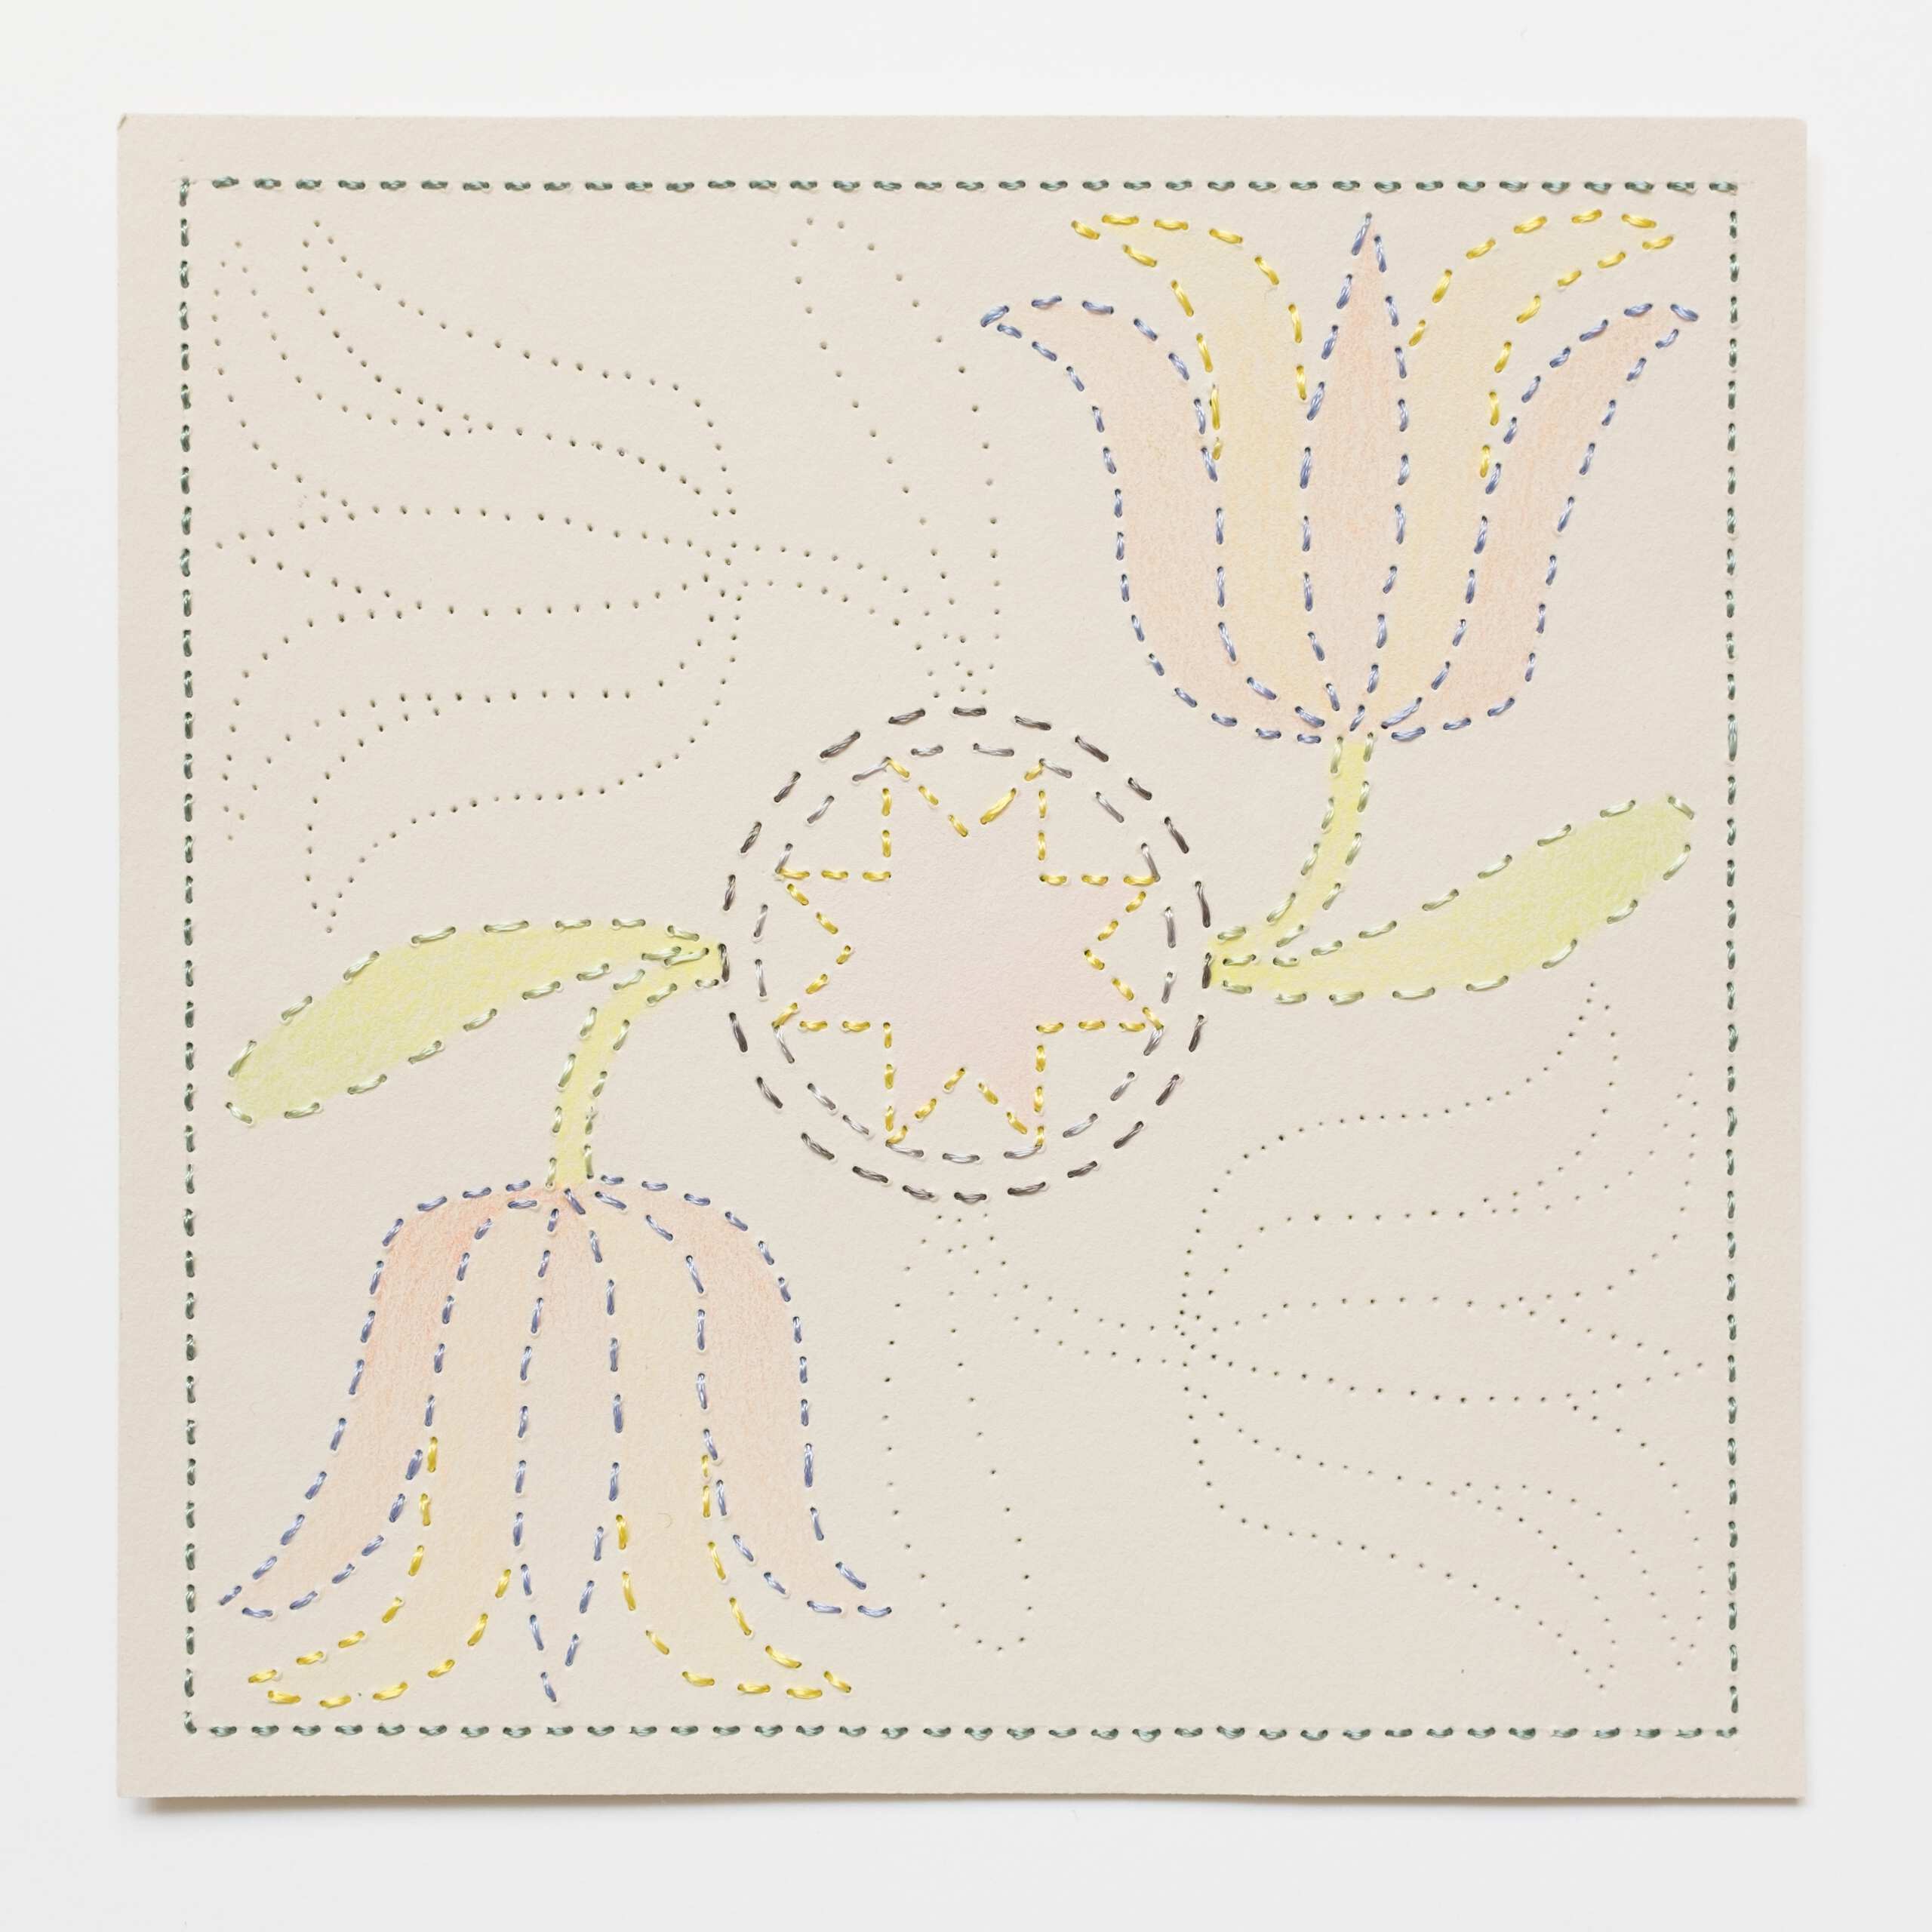 Quilted Composition [grey // tulips], Hand-embroidered silk thread, pencil, and coloured pencil on paper, 2019